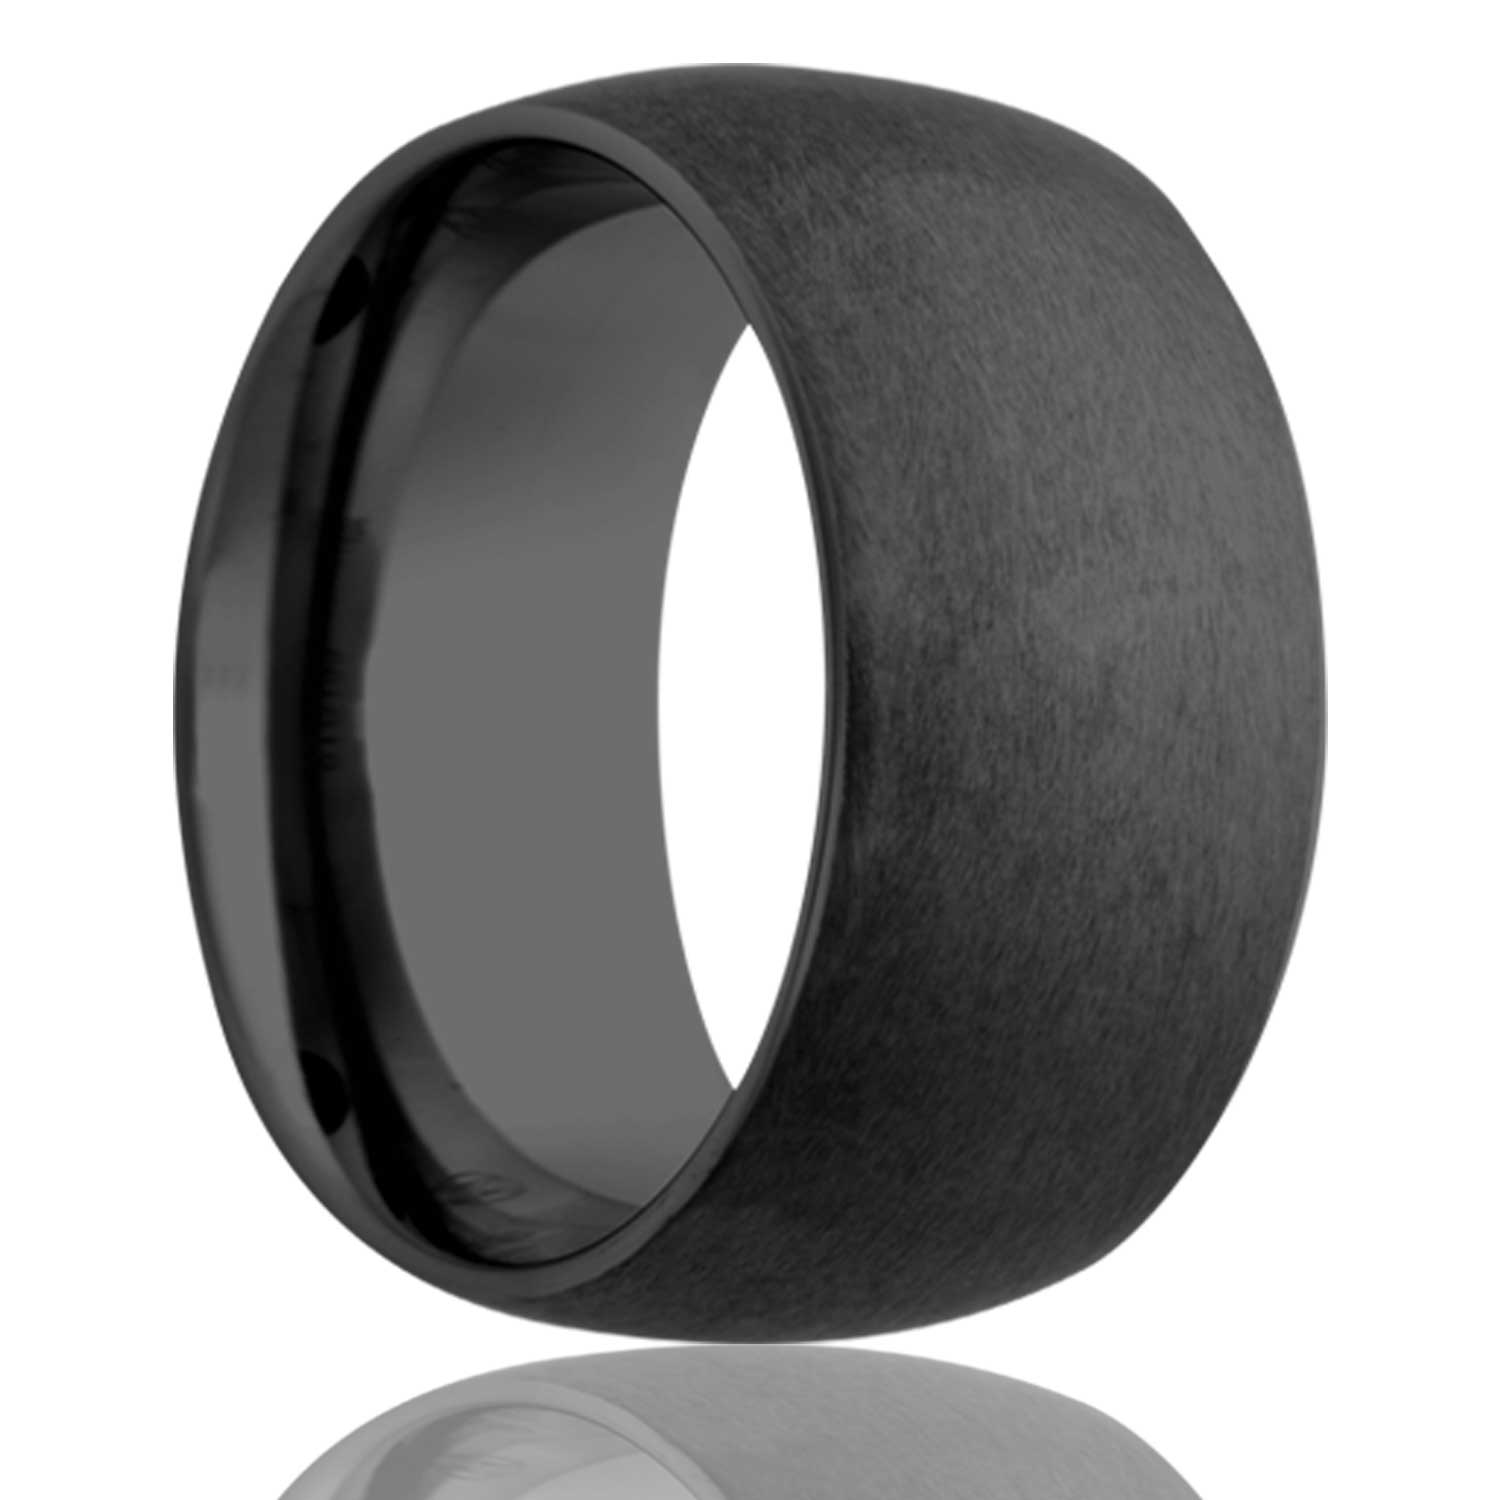 A domed satin finish black ceramic wedding band displayed on a neutral white background.